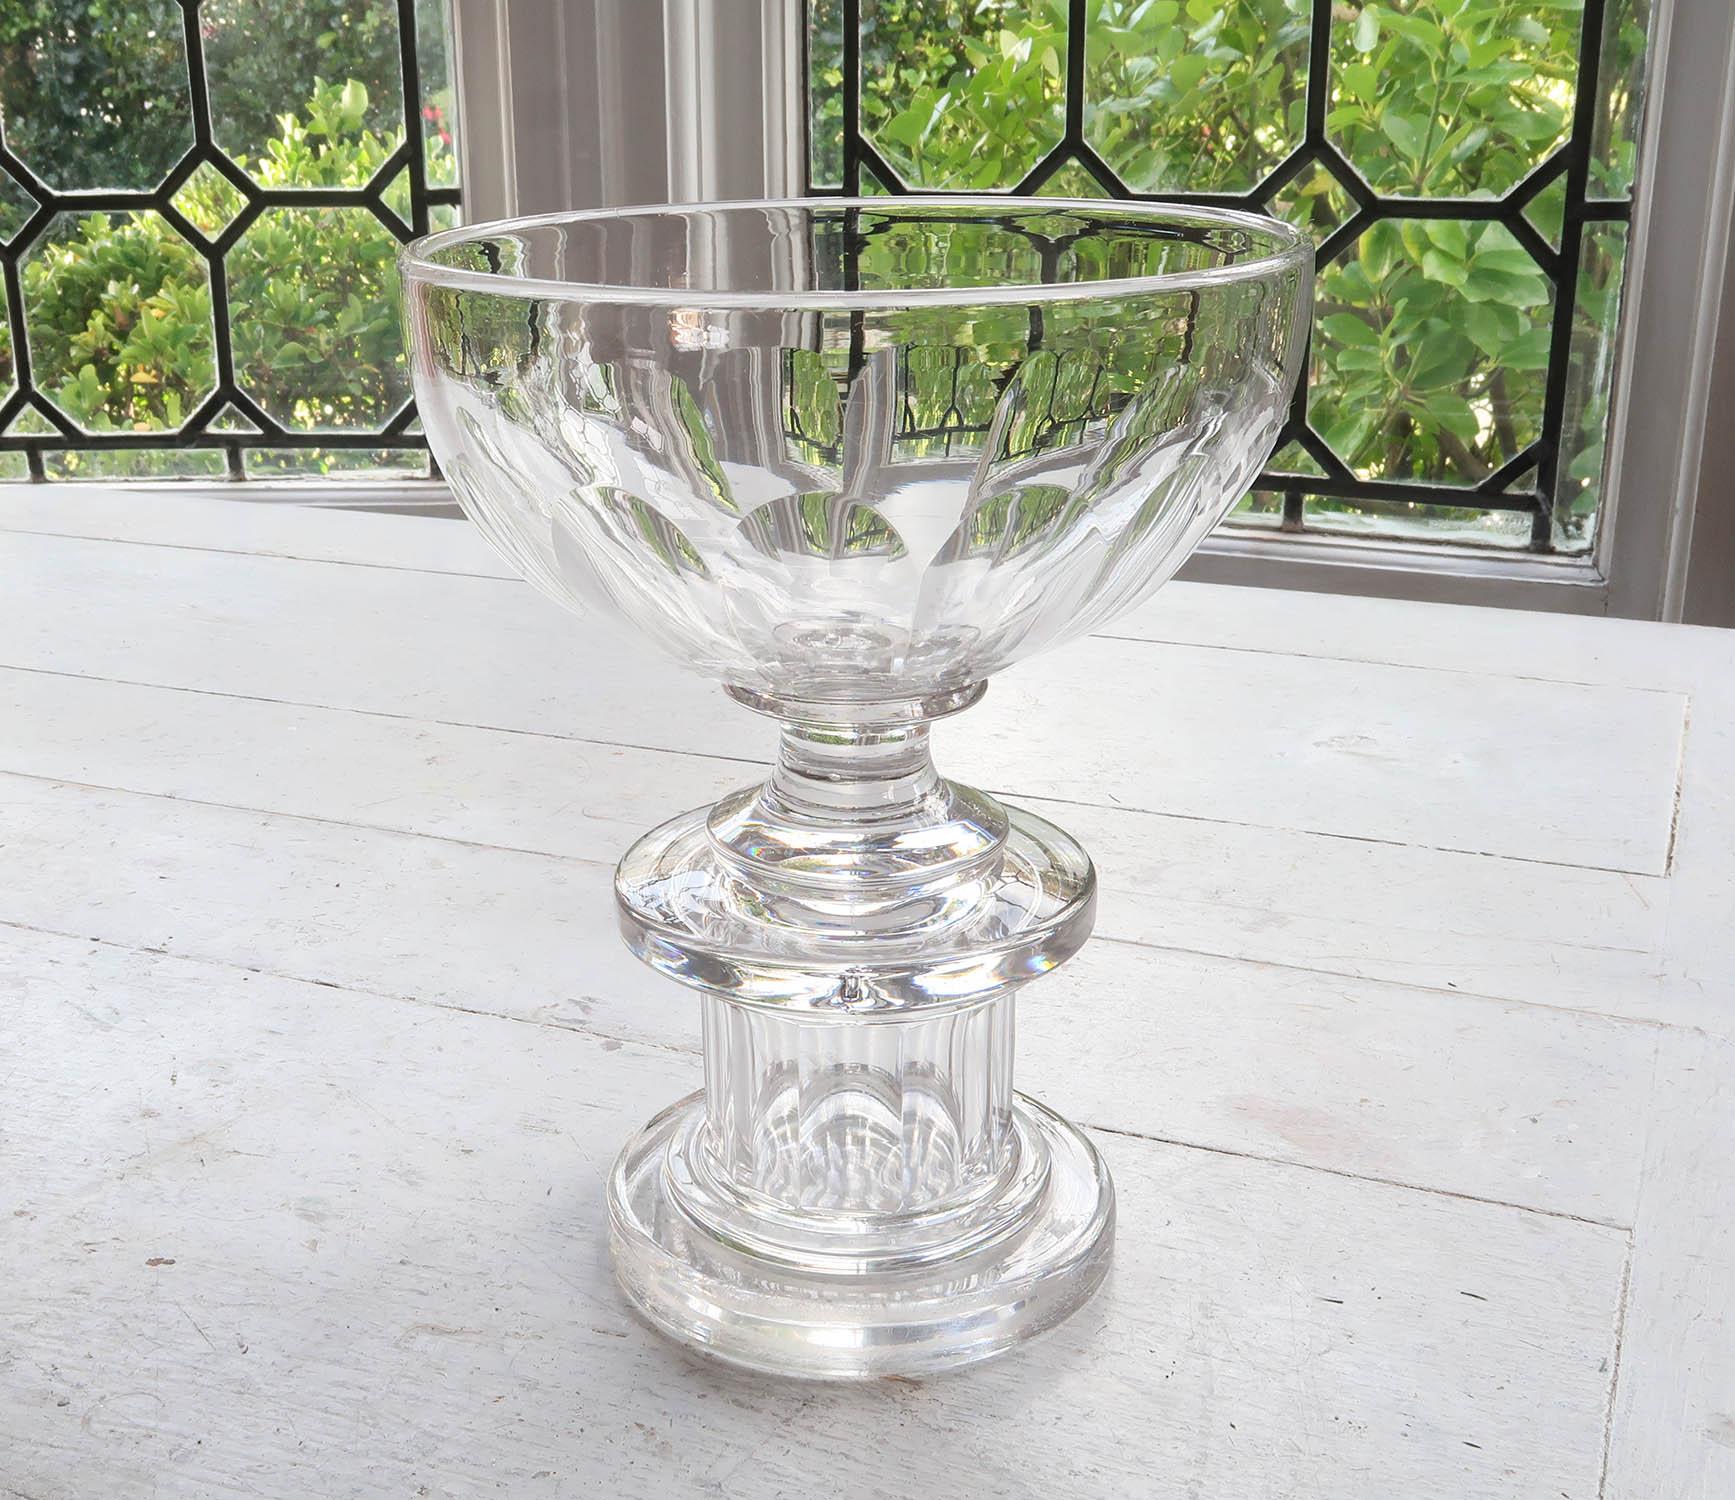  Large Antique Georgian Style Glass Pedestal Bowl, English, 19th Century In Good Condition For Sale In St Annes, Lancashire